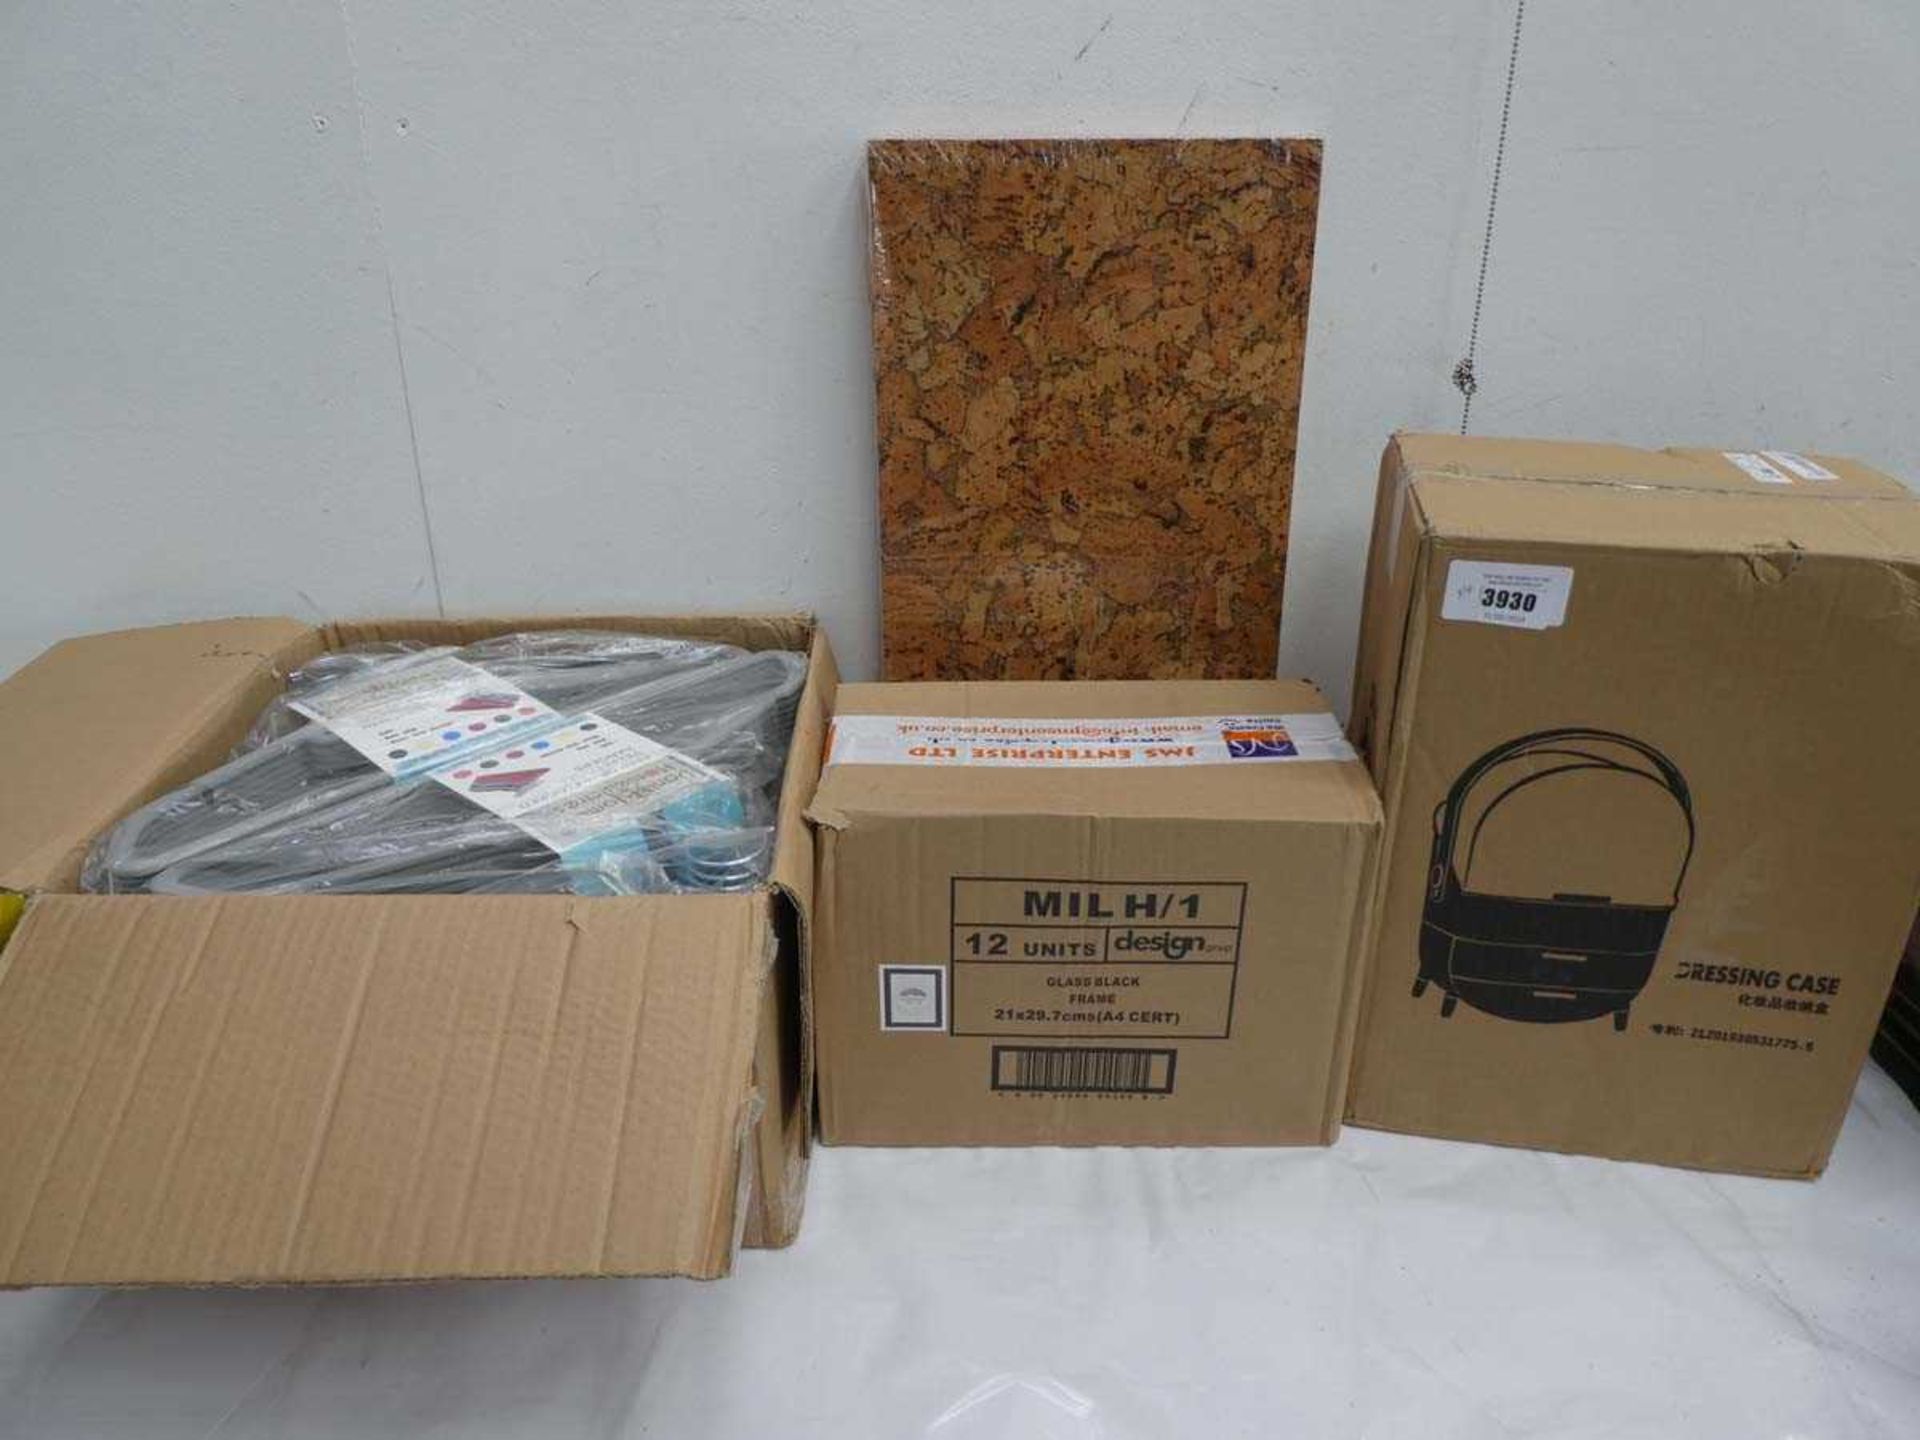 +VAT Box of approx 80 hangers, Box of 12 picture frames, Dressing case and pack of cork tiles